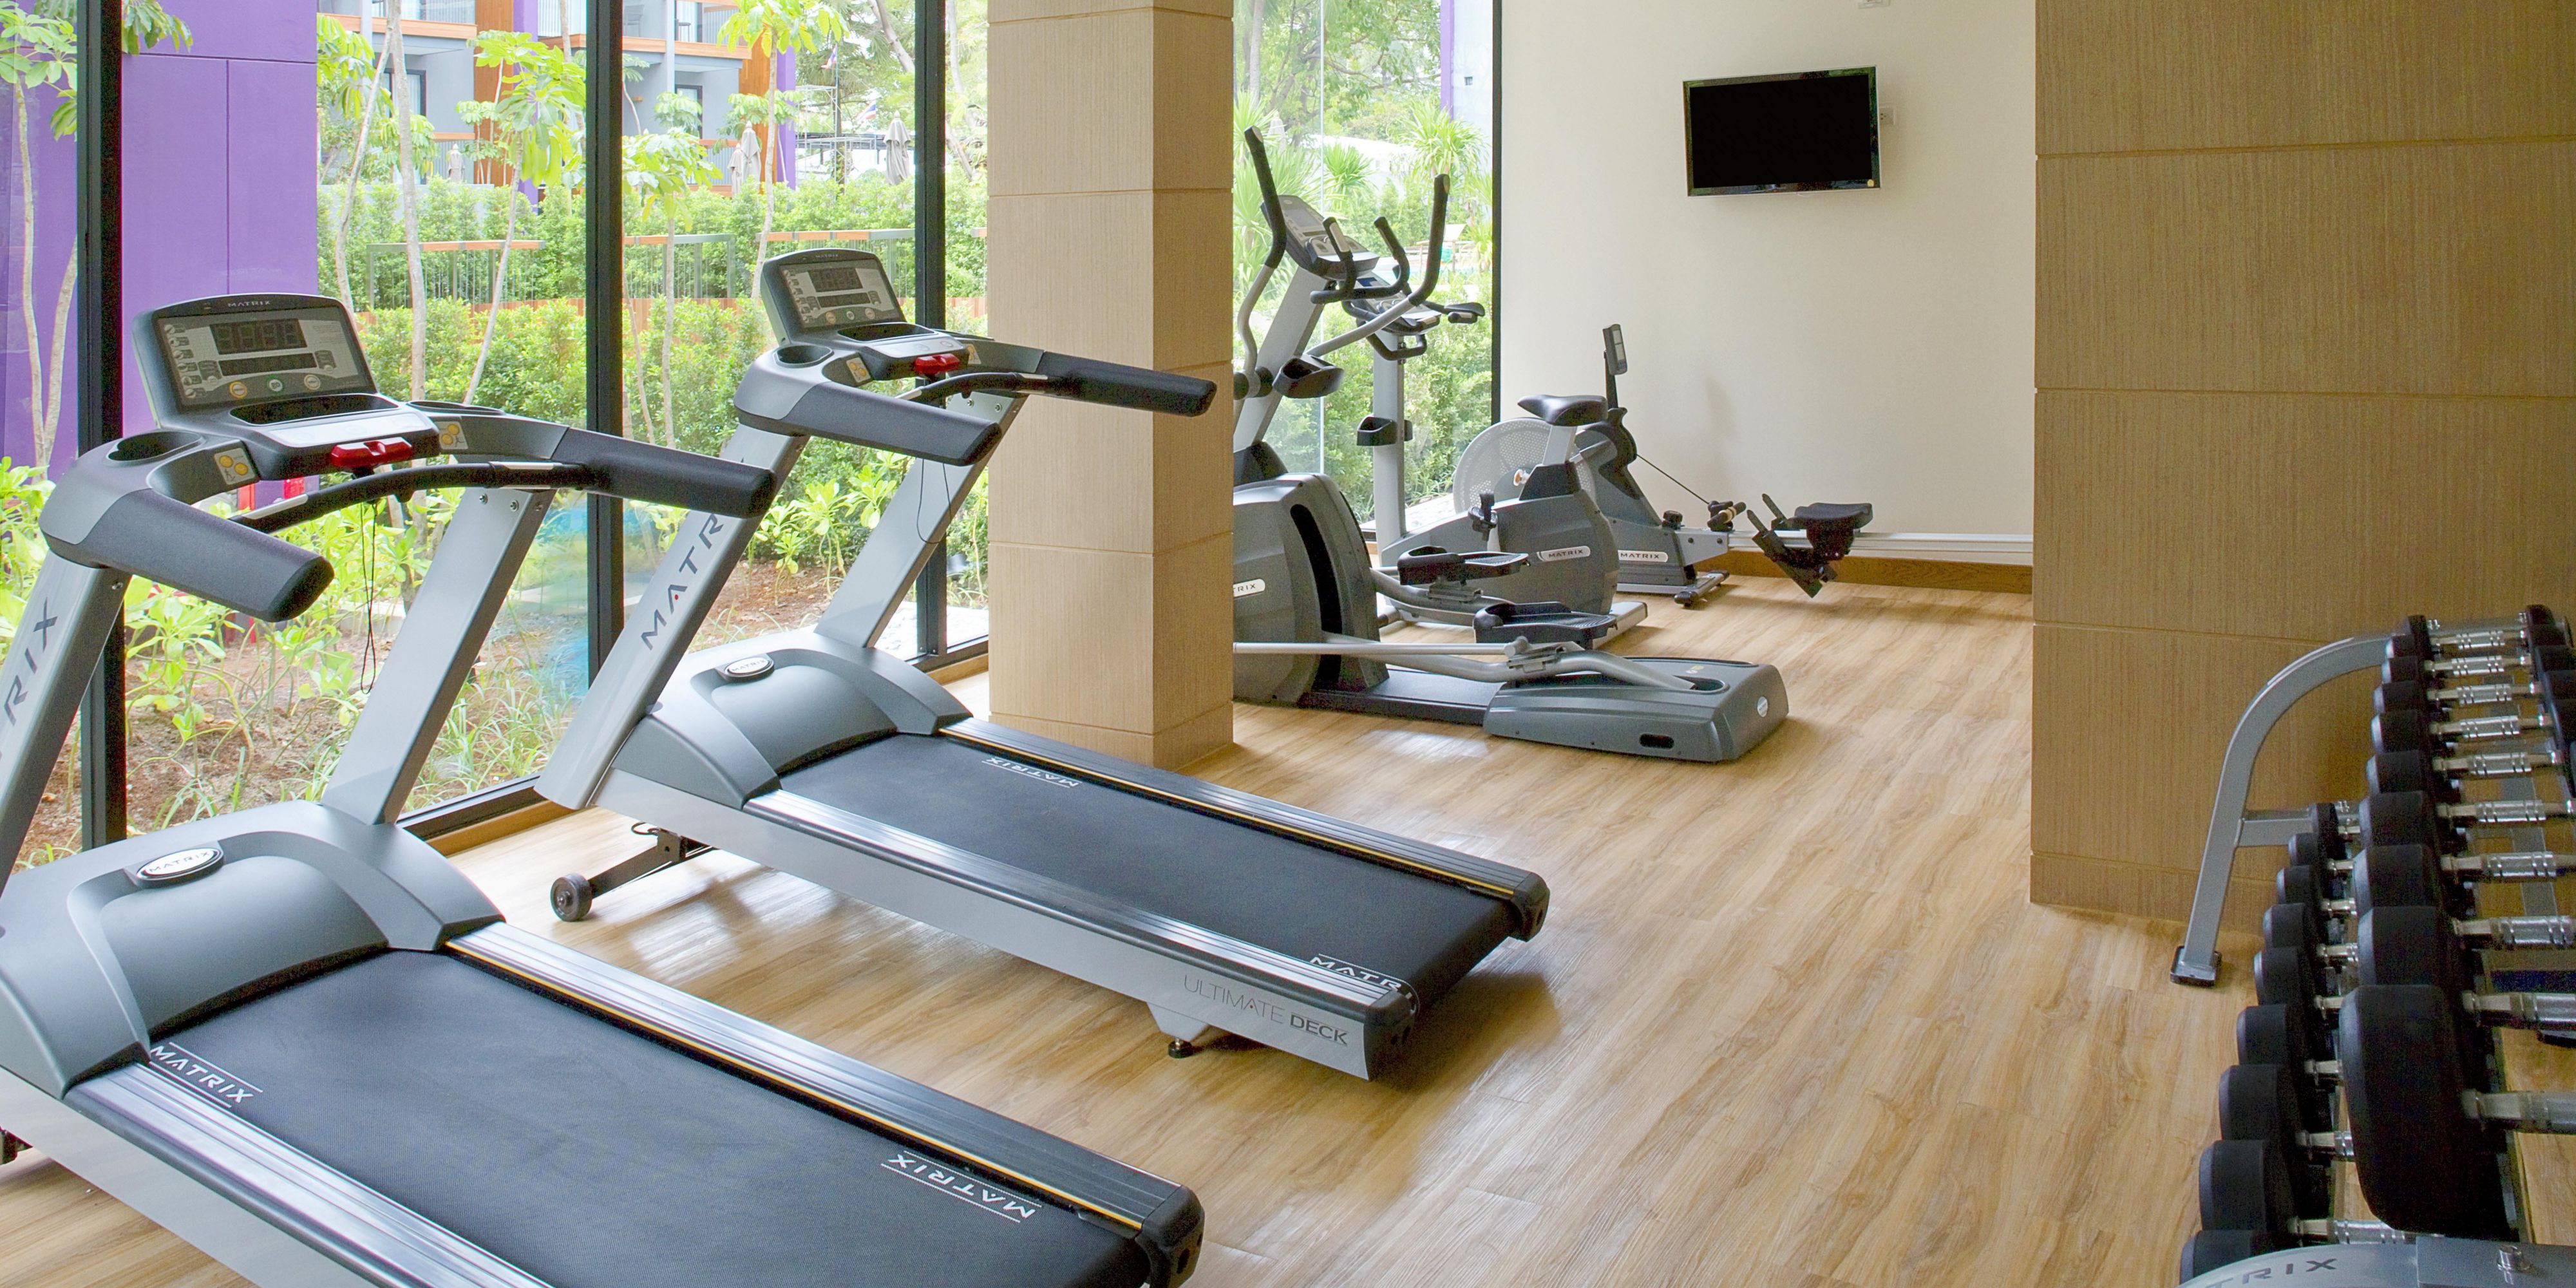 Our 24-hour fitness center allows you to exercise whenever it is convenient for you. With current equipment and a convenient location, there are no excuses for skipping your workout.